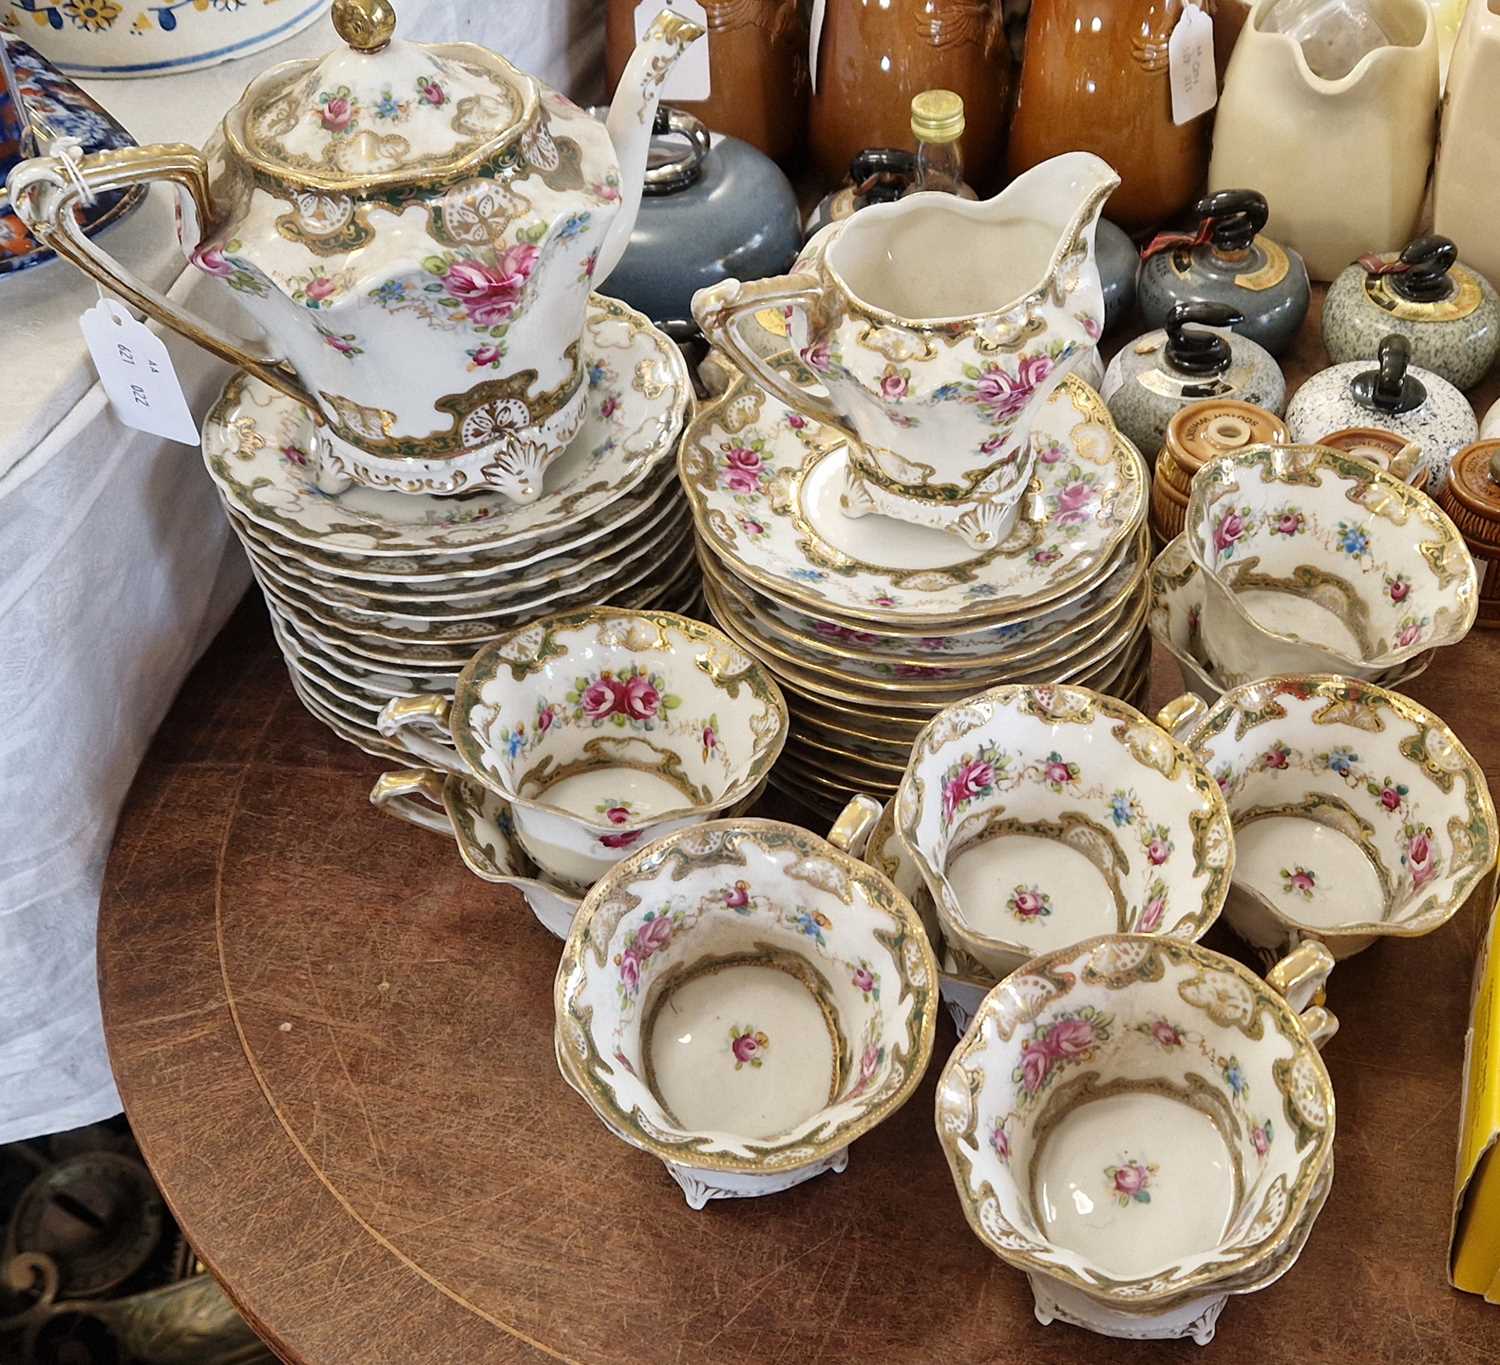 An antique porcelain hand-painted part tea set, with floral details and richly gilded borders, the